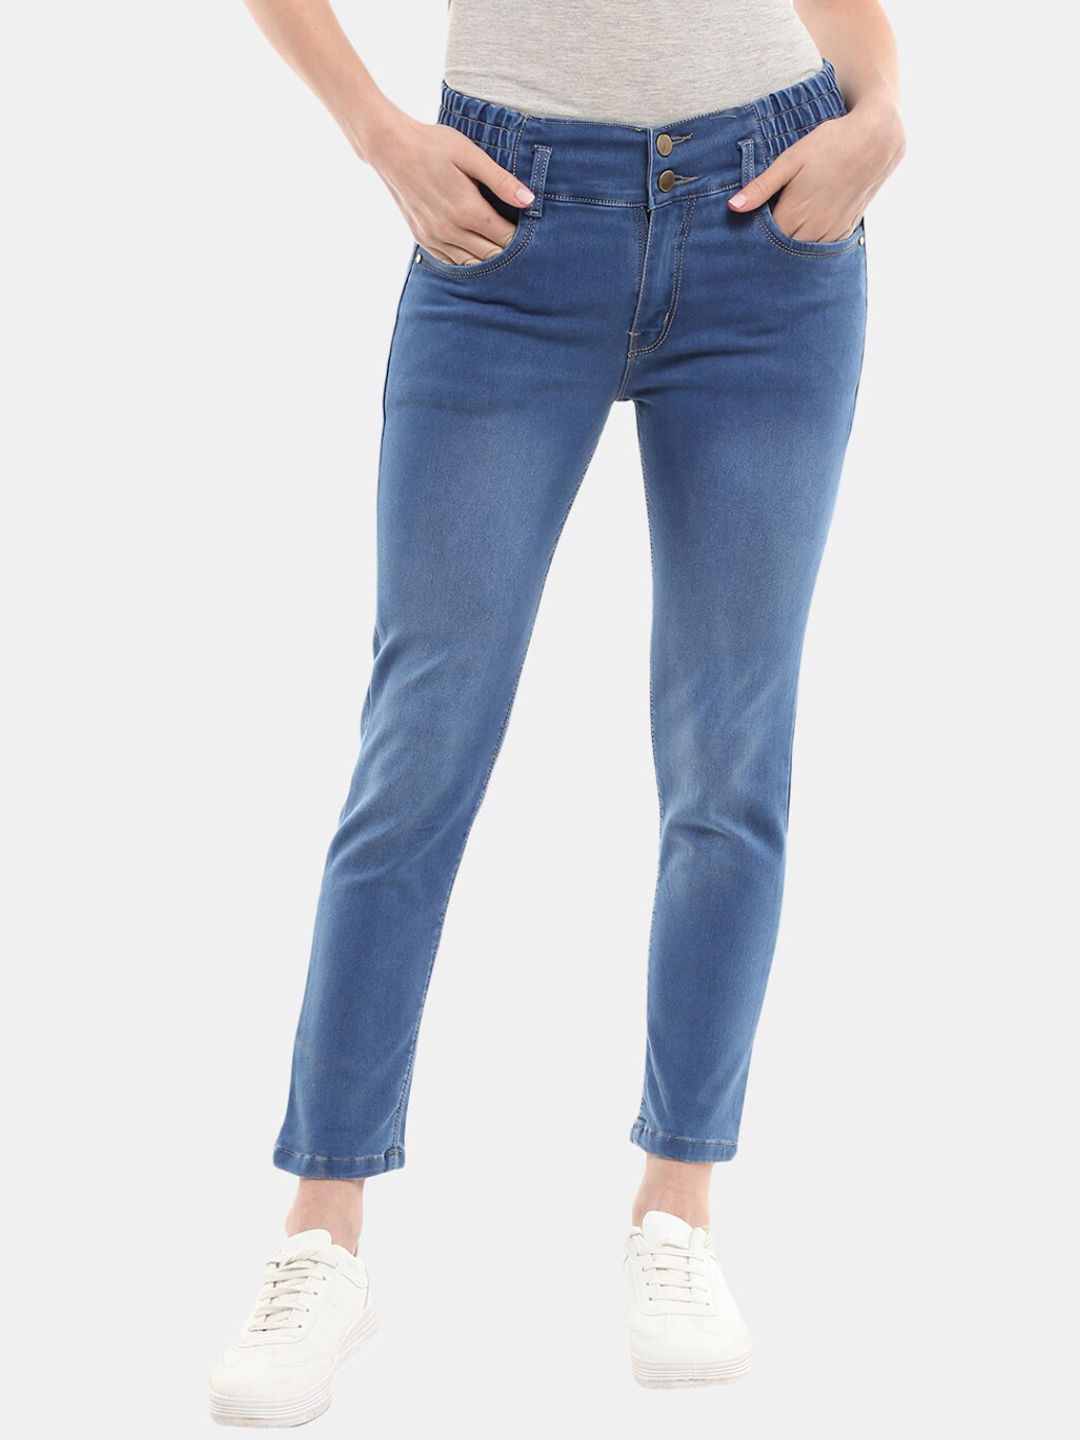 V-Mart Women Blue Light Fade Stretchable Jeans Price in India